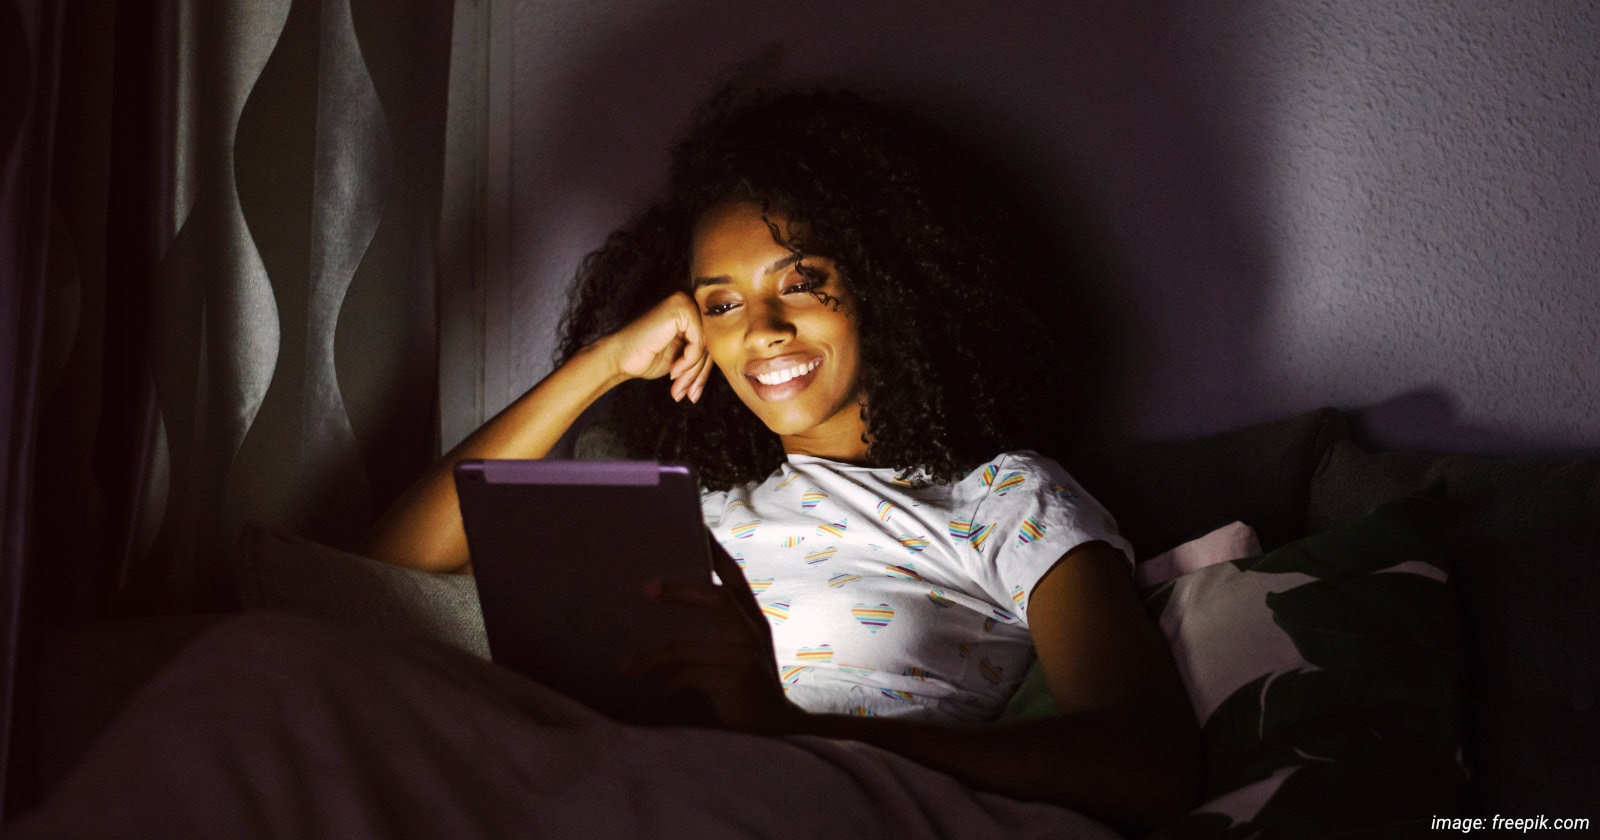 Use your Netflix binge-watching habits to read books instead